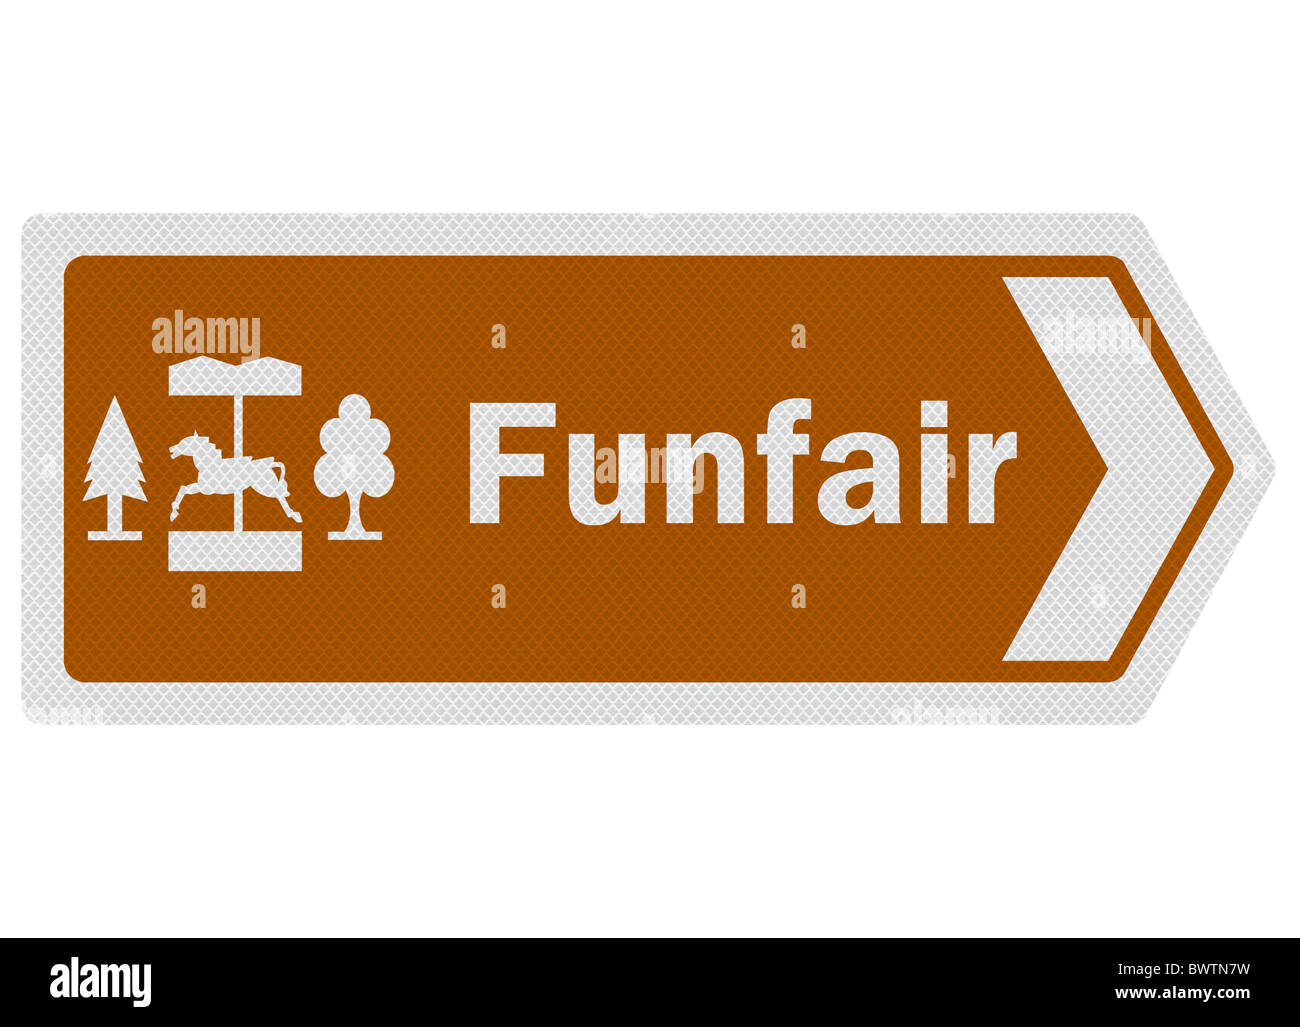 Photo-realistic tourist information-style roadsign, depicting 'funfair'. Stock Photo